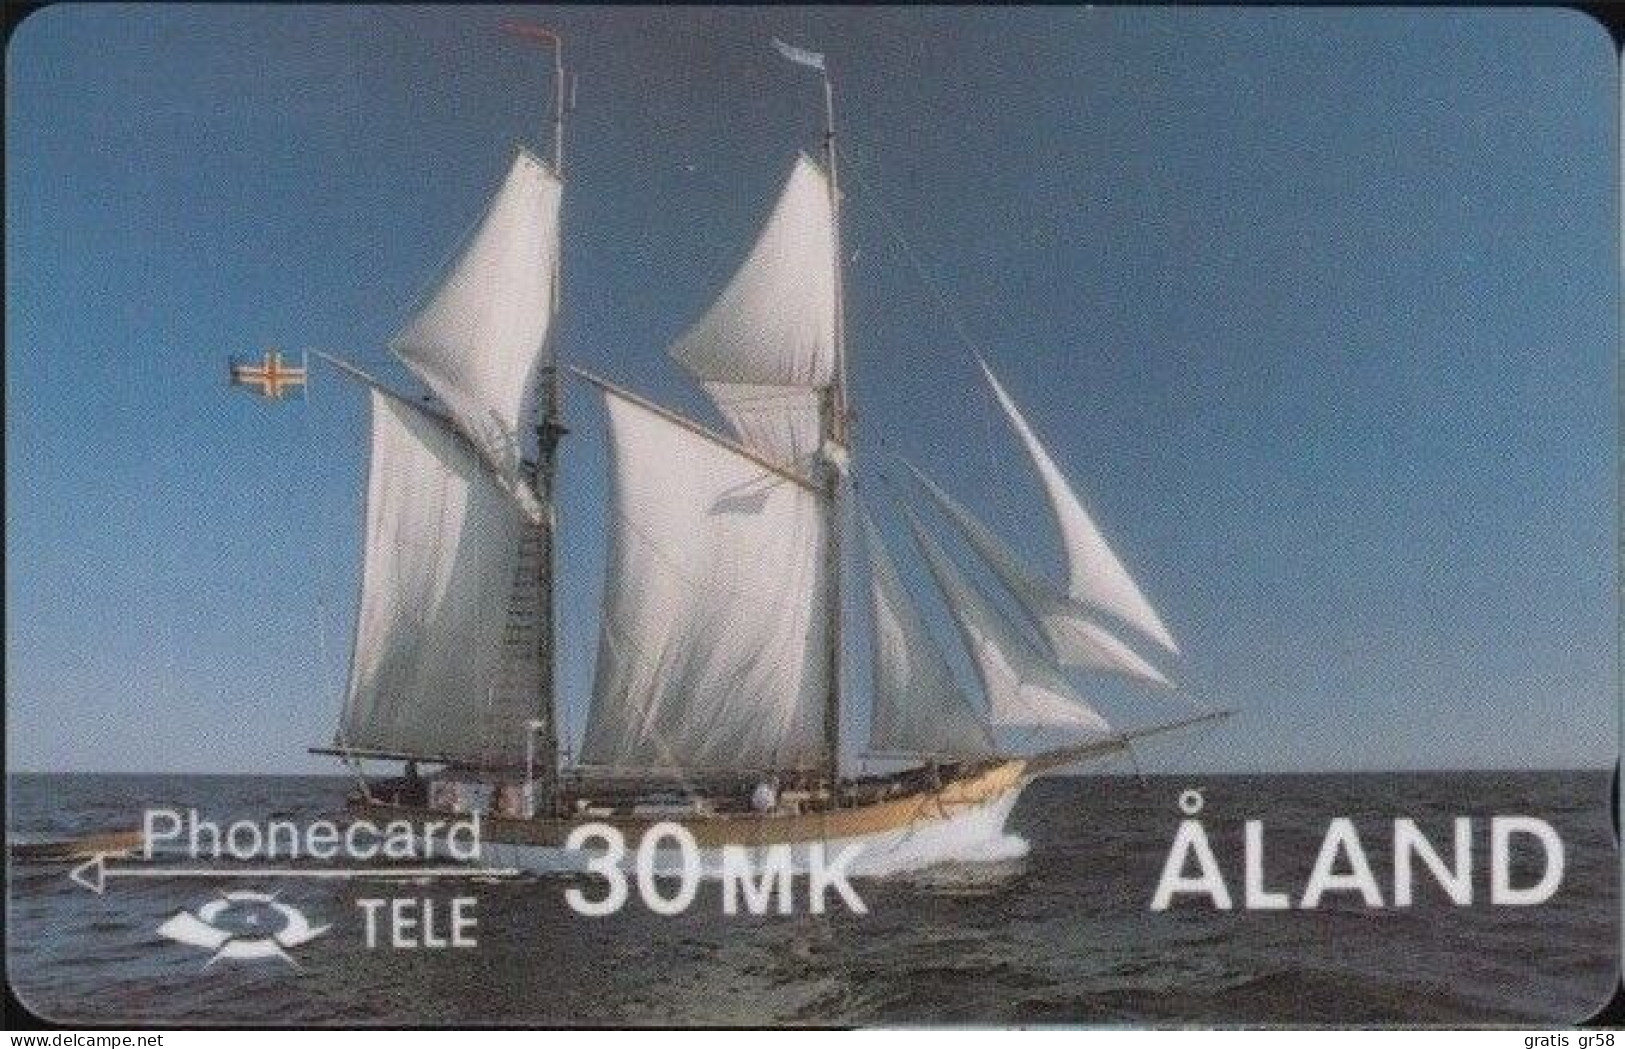 Aland - GPT, 2FINC001745, 1st Edition, The Galley Albanus, Sailing Ships, 25.000ex, 5/90, Used - Aland